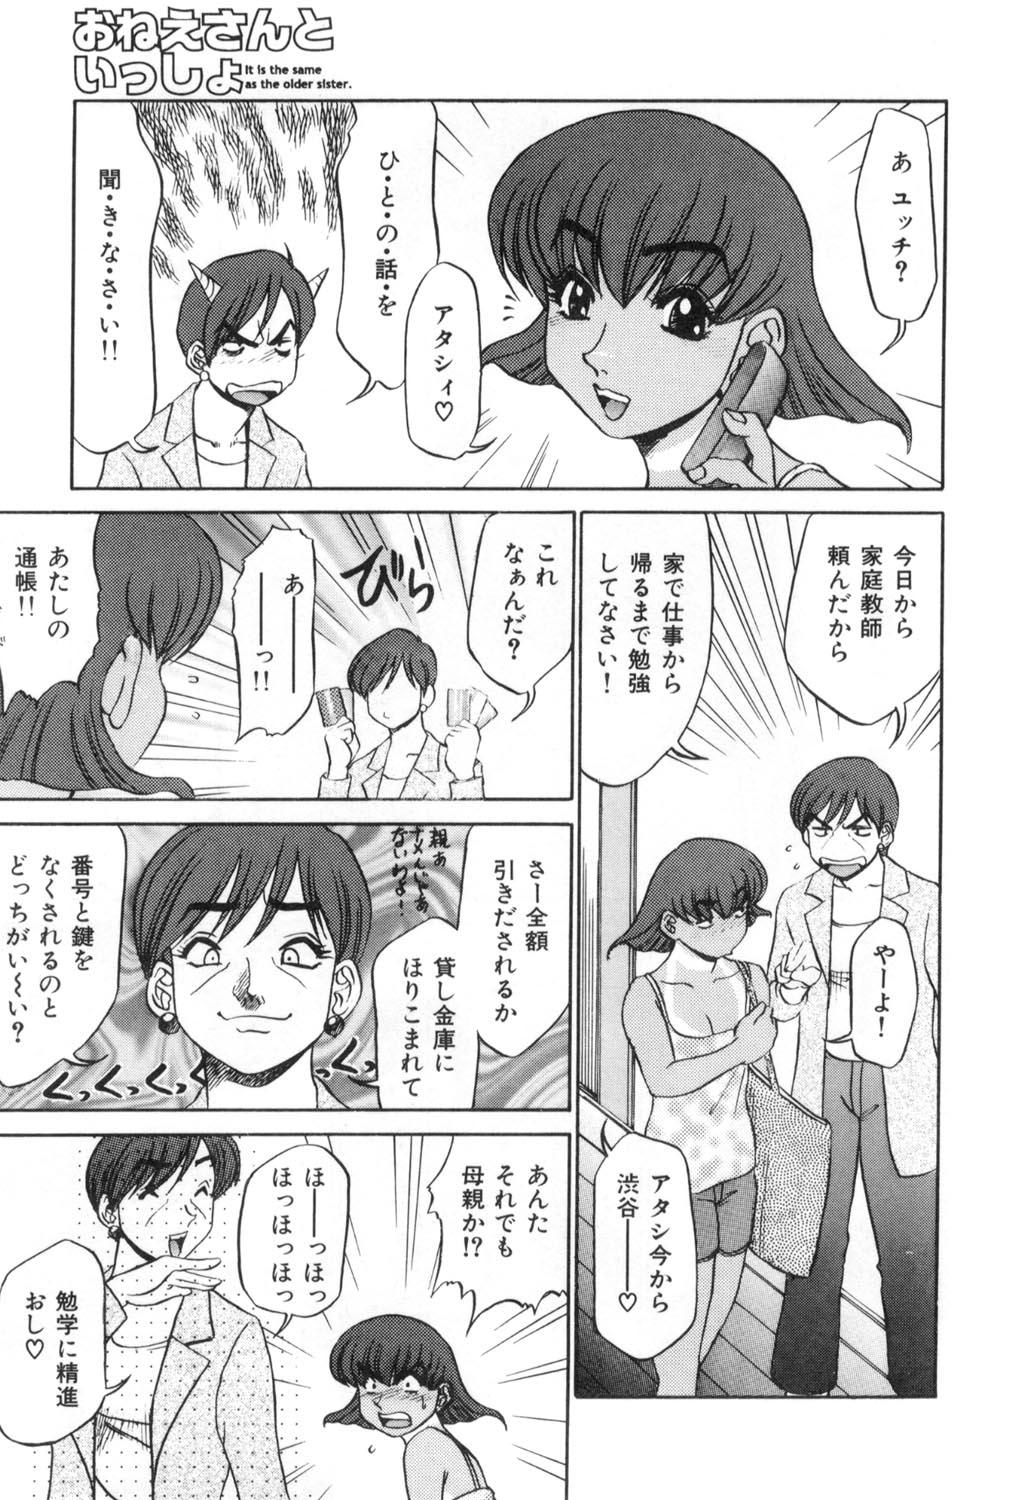 Oneesan to Issho - It is the same as the older sister. 56